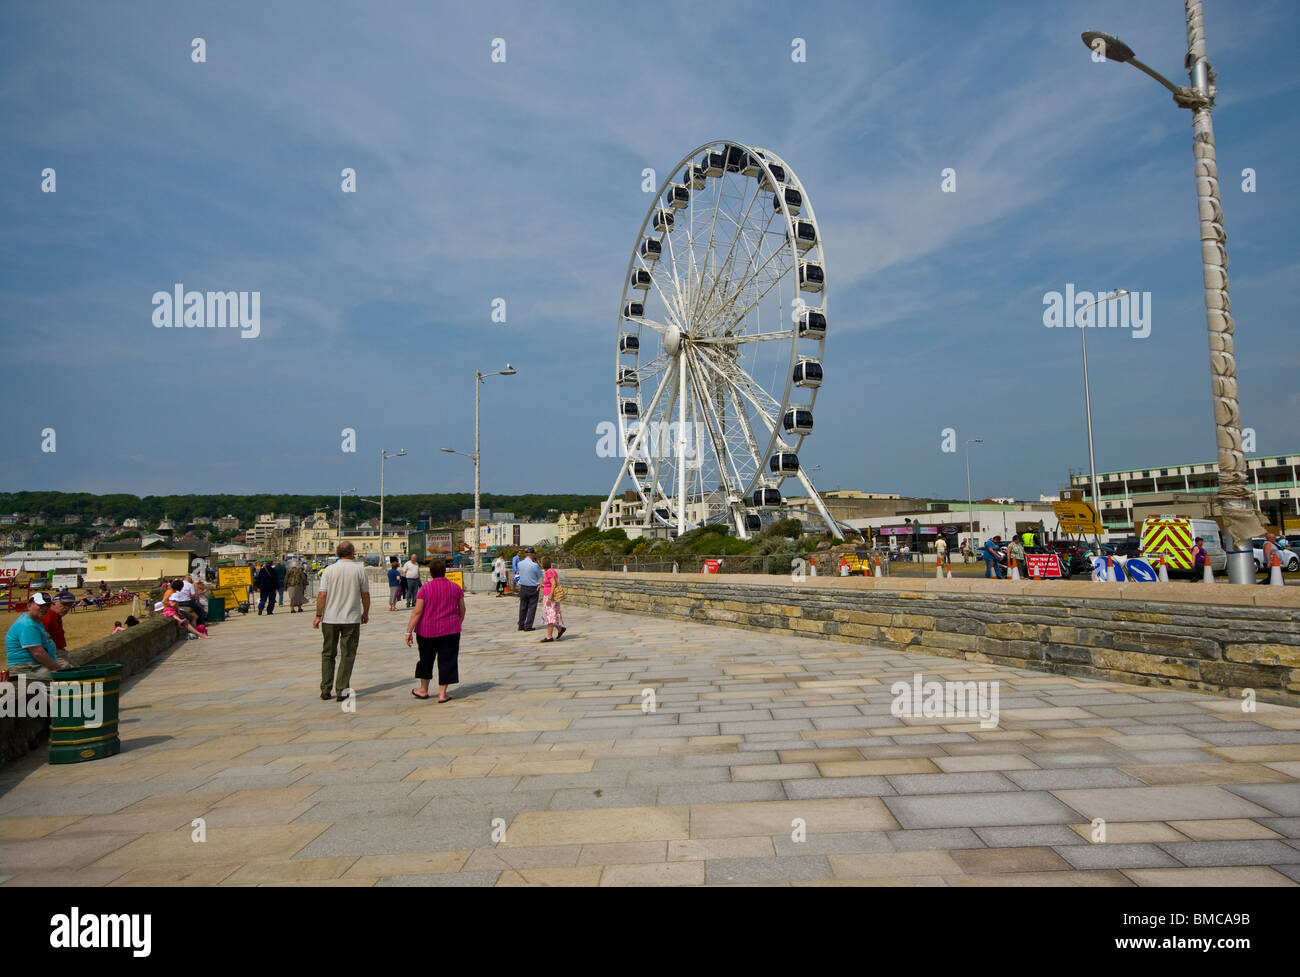 The Big Wheel On The Seafront at Weston Super Mare Somerset England Stock Photo